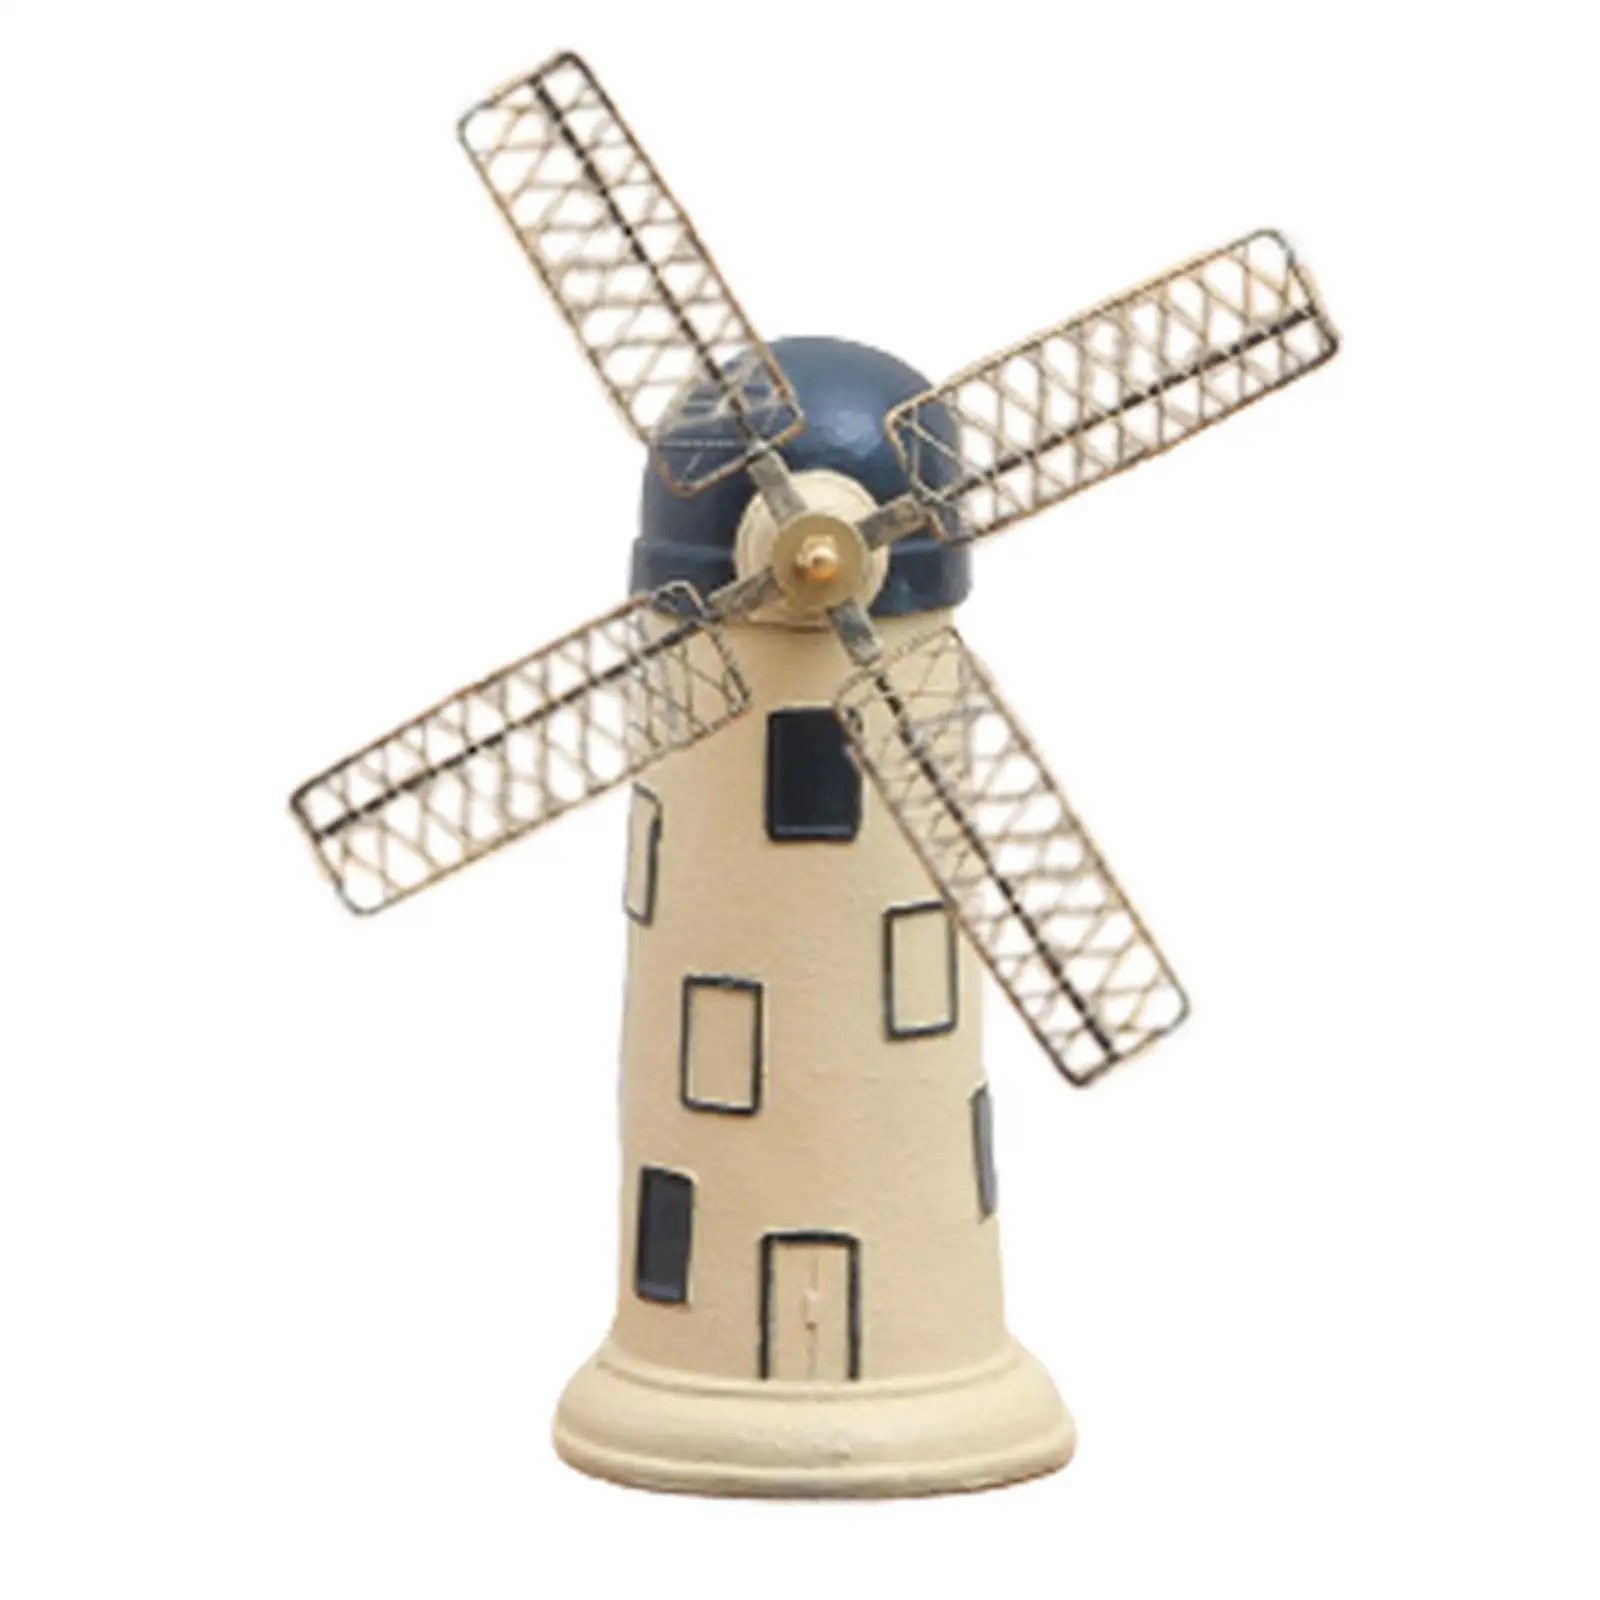 Windmill Phonograph Model Display Ornaments Decorative Classic Resin Crafts for Living Room Tabletop Table Holiday Gifts